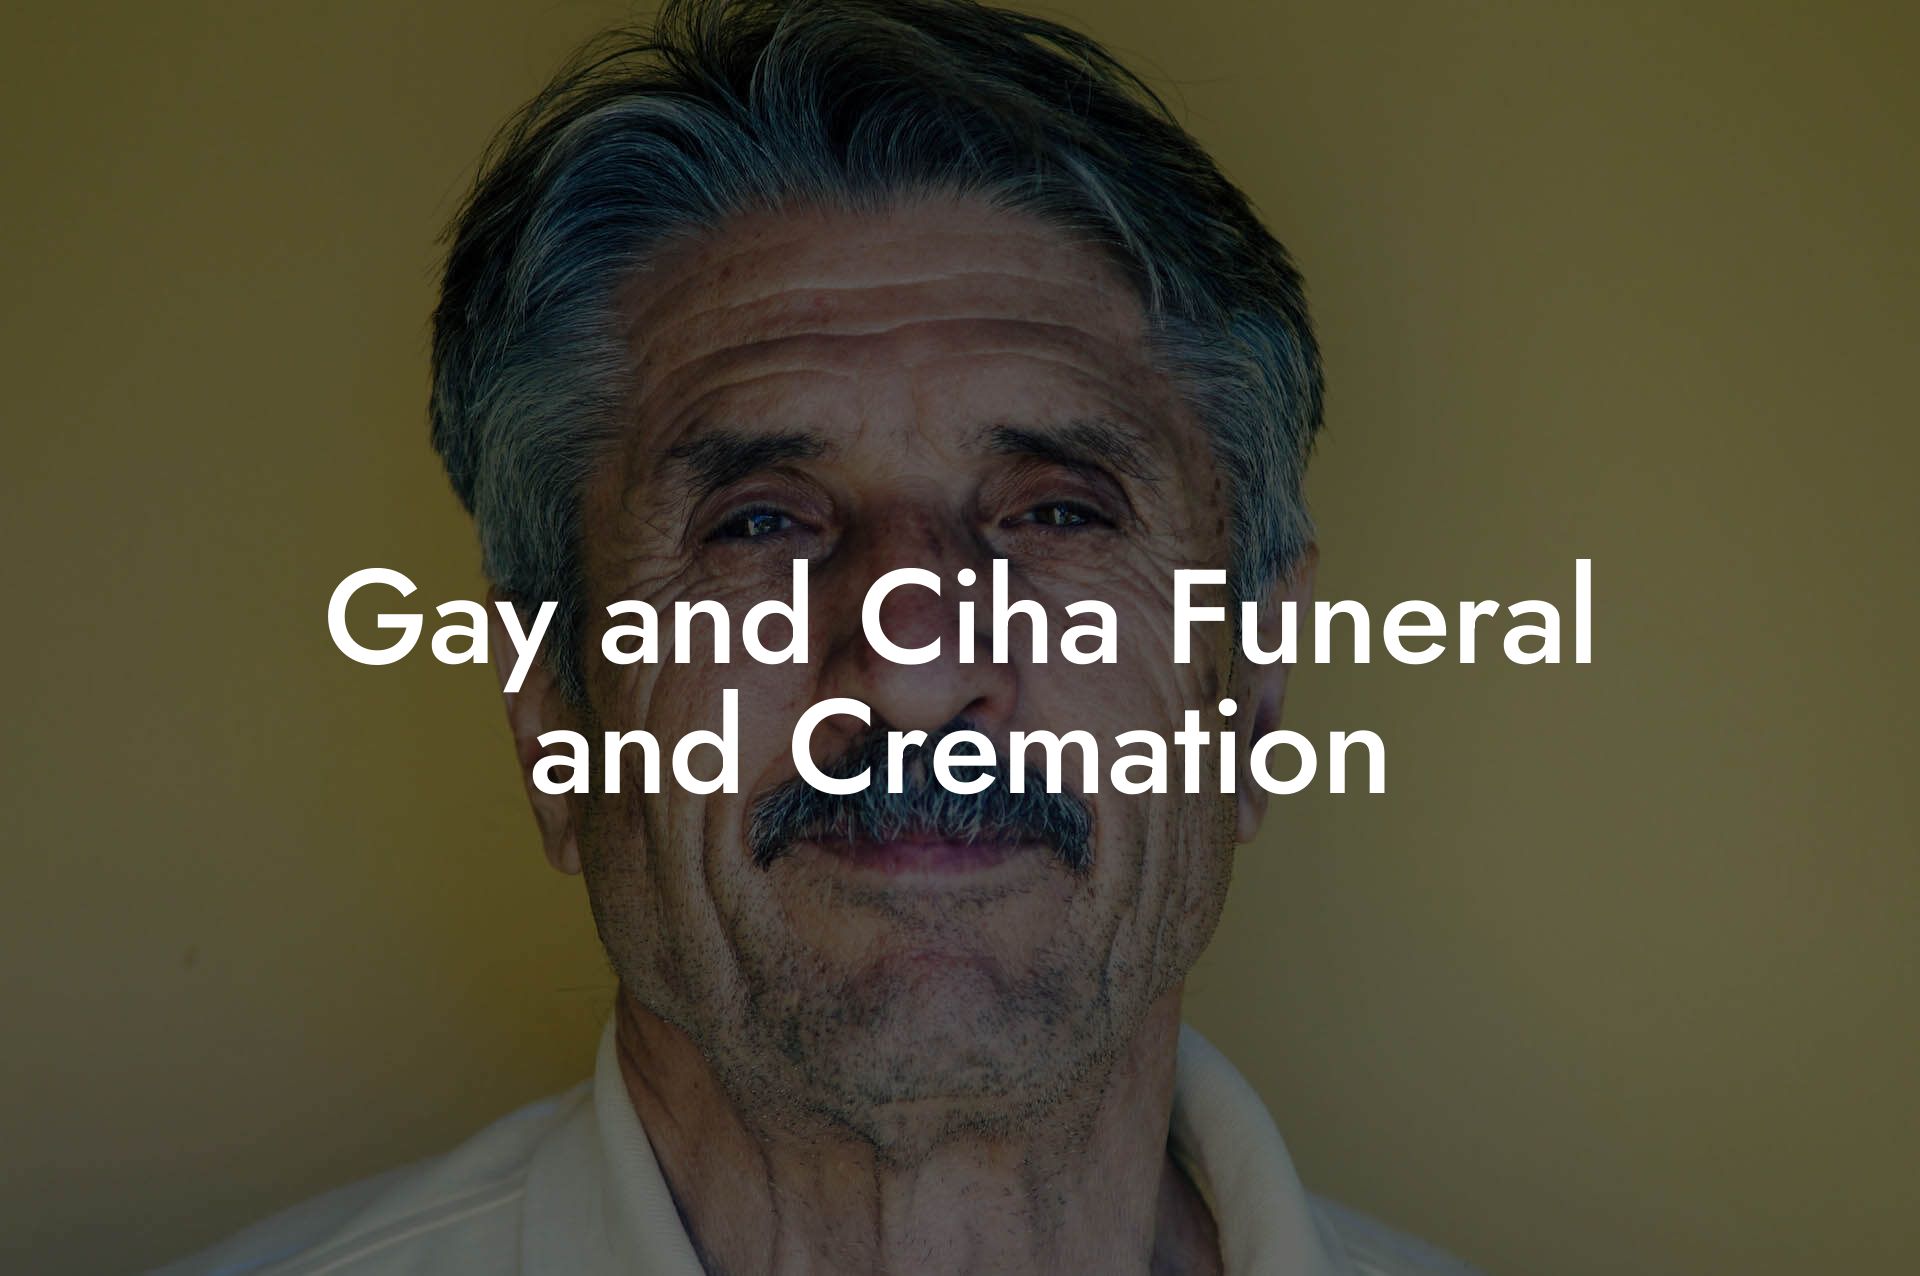 Gay and Ciha Funeral and Cremation